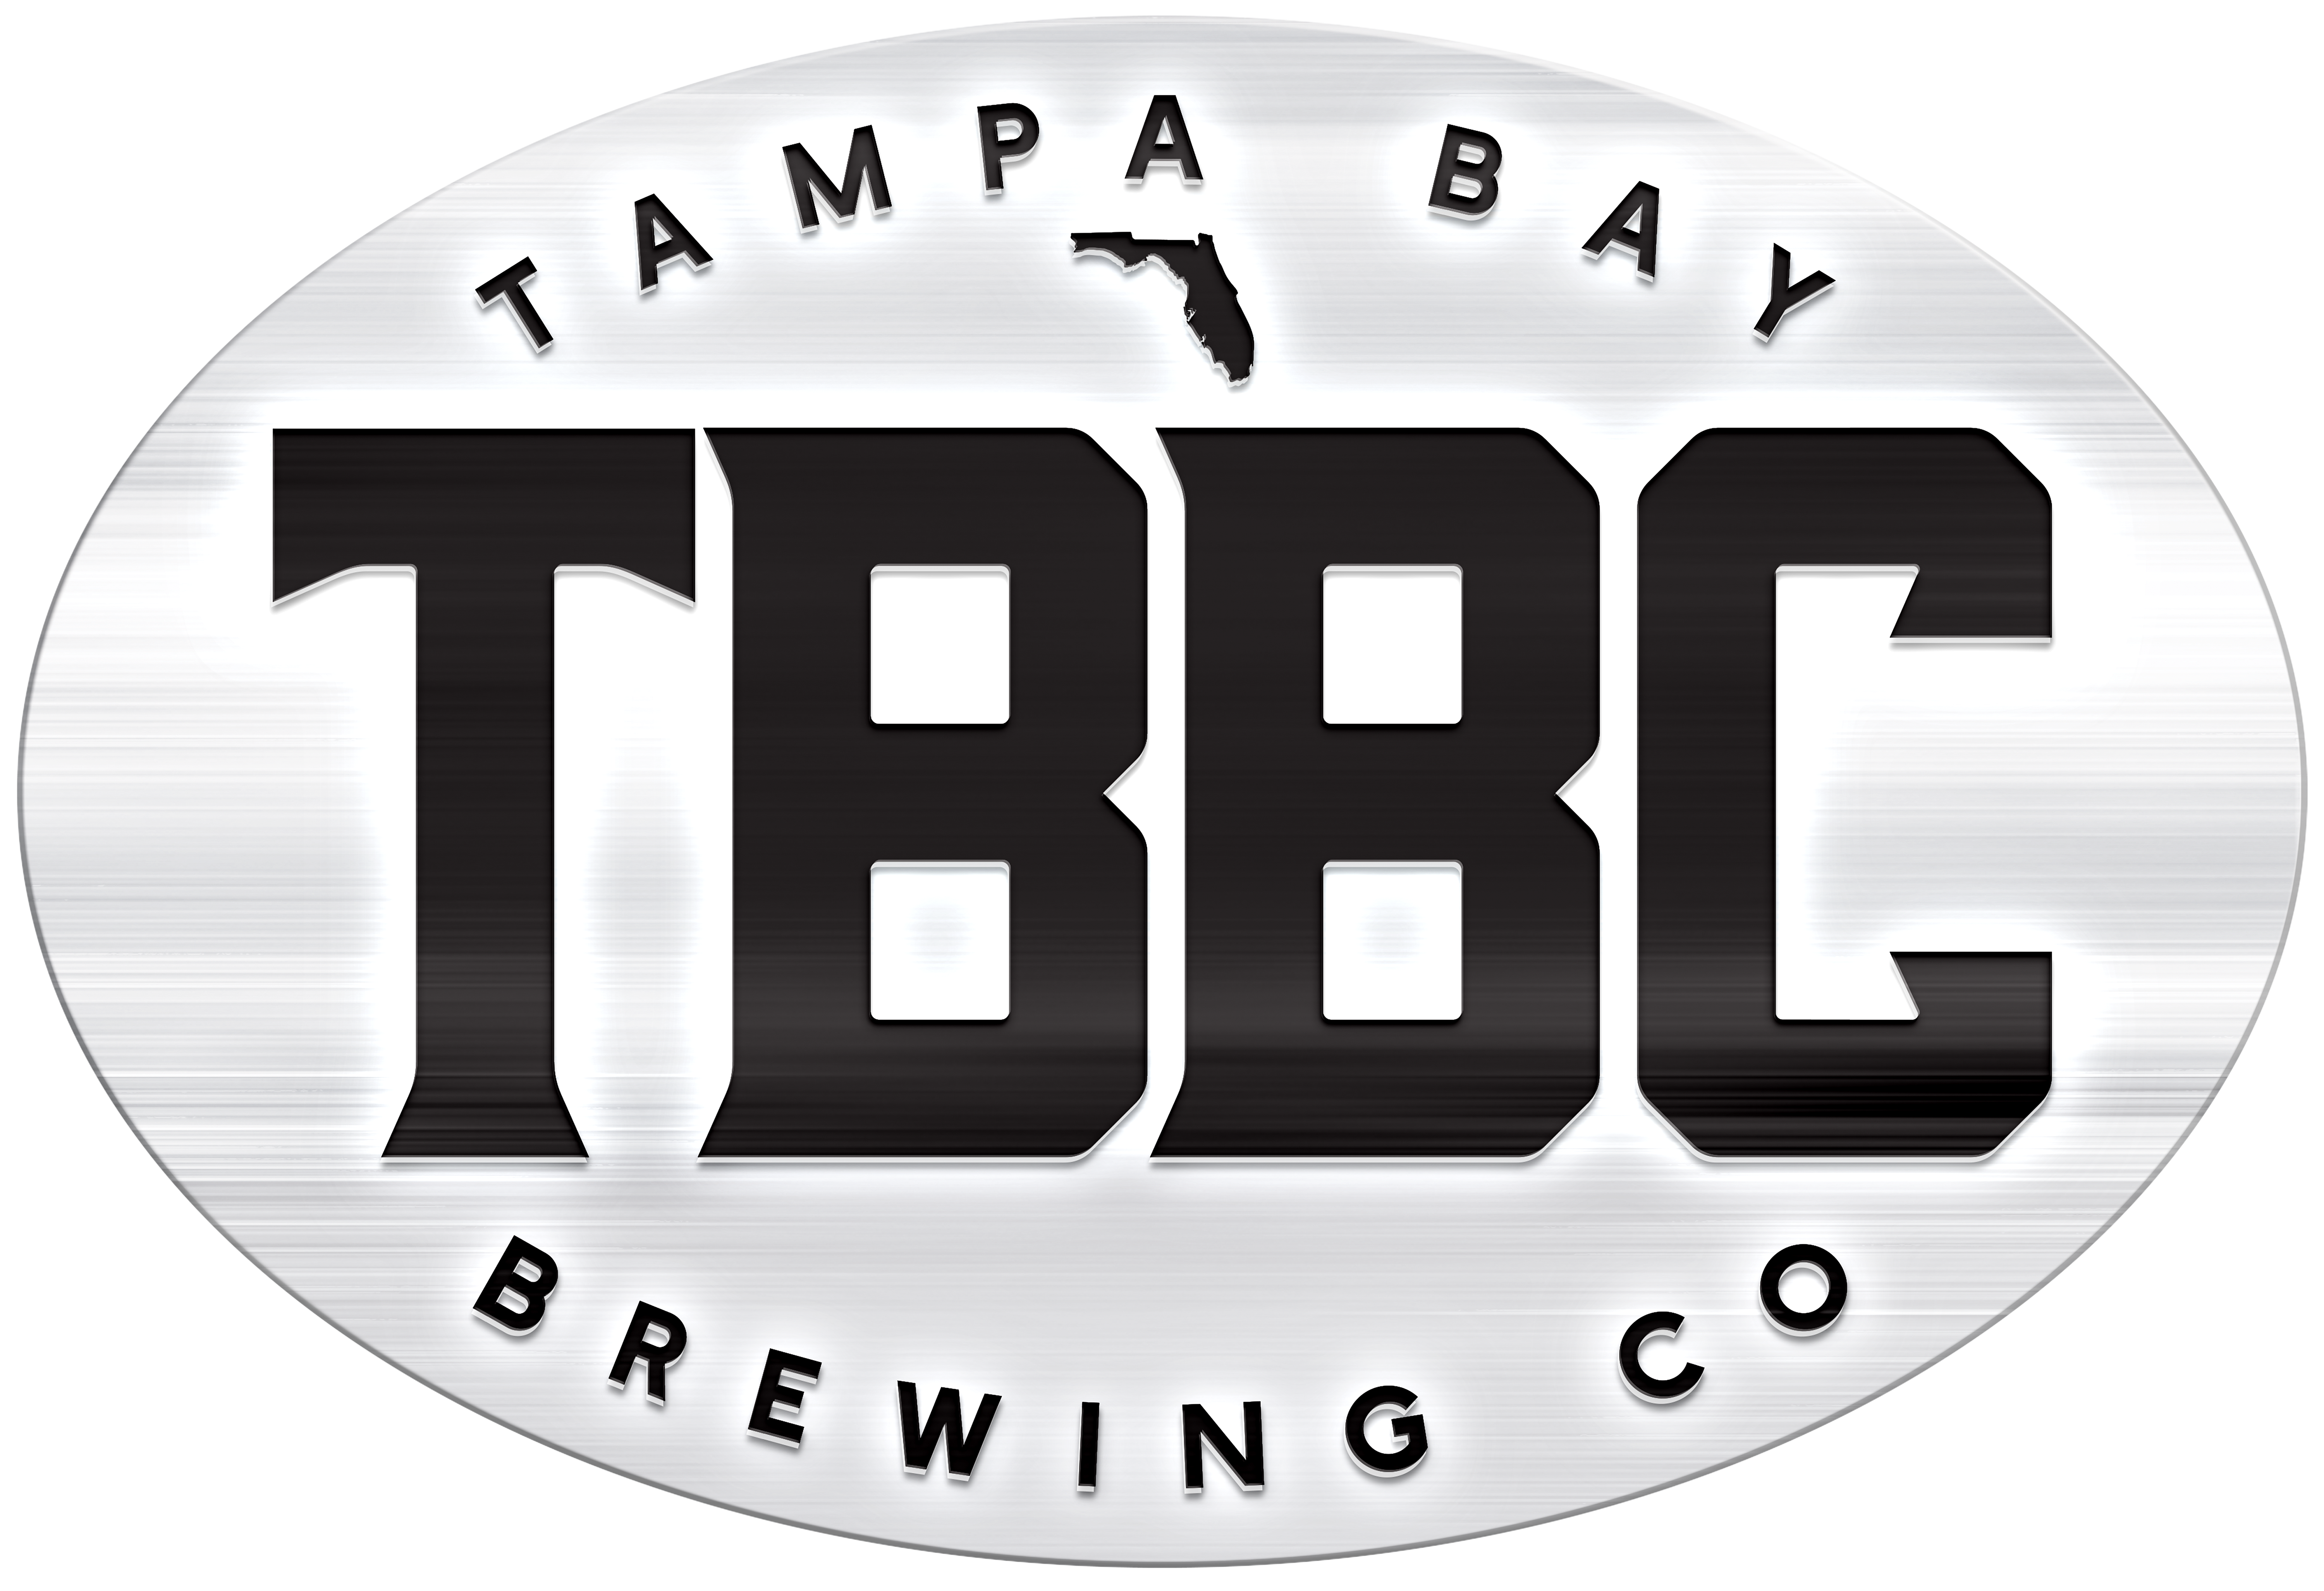 Tampa Bay Brewing Company - Crafted for the Florida Lifestyle